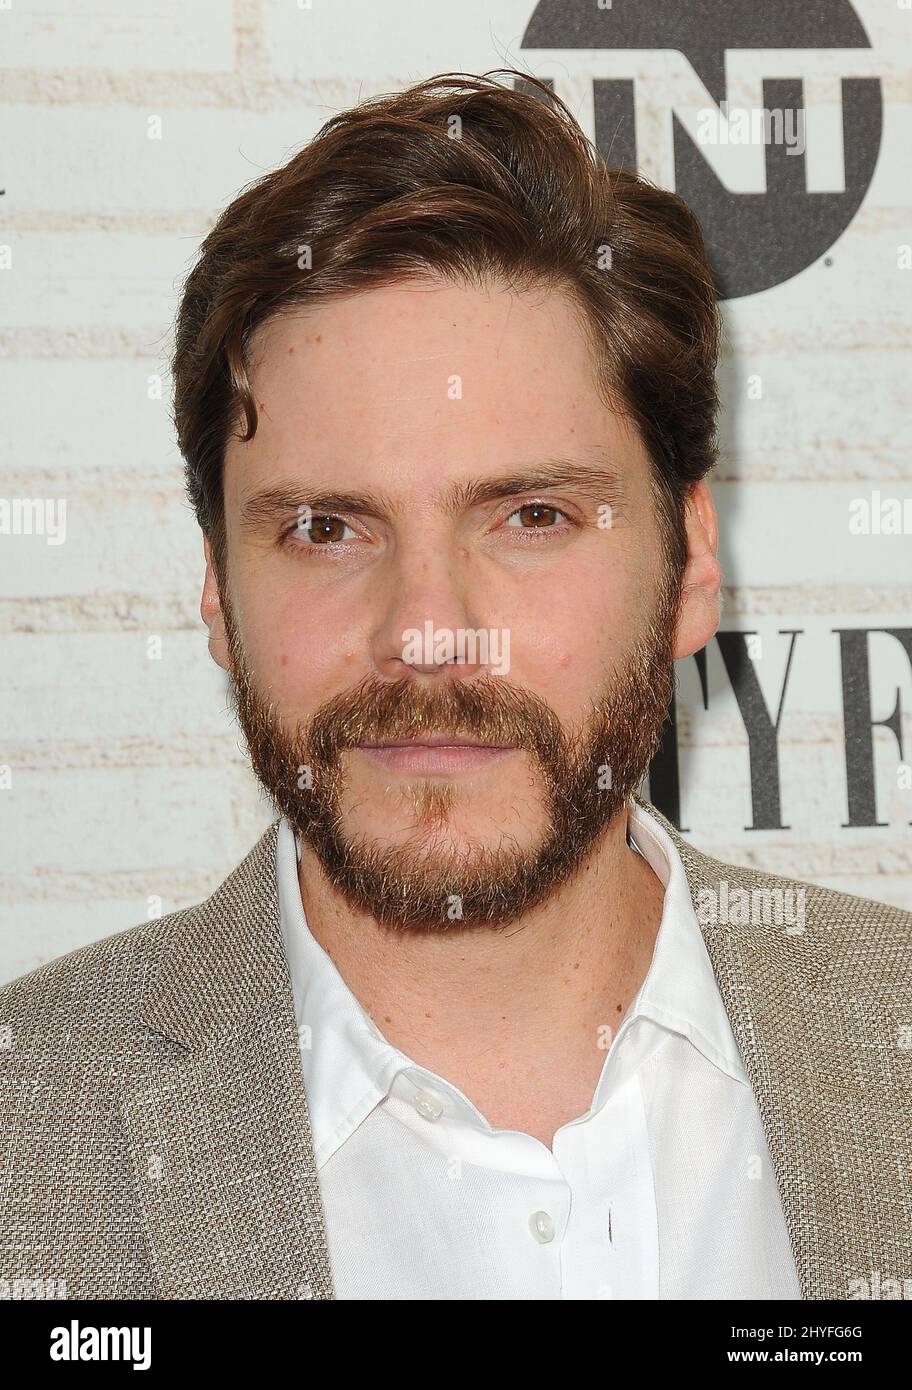 Daniel Bruhl attending the NT's 'The Alienist' FYC event held at the Wallis Annenberg Center, CA on May 23, 2018. Stock Photo